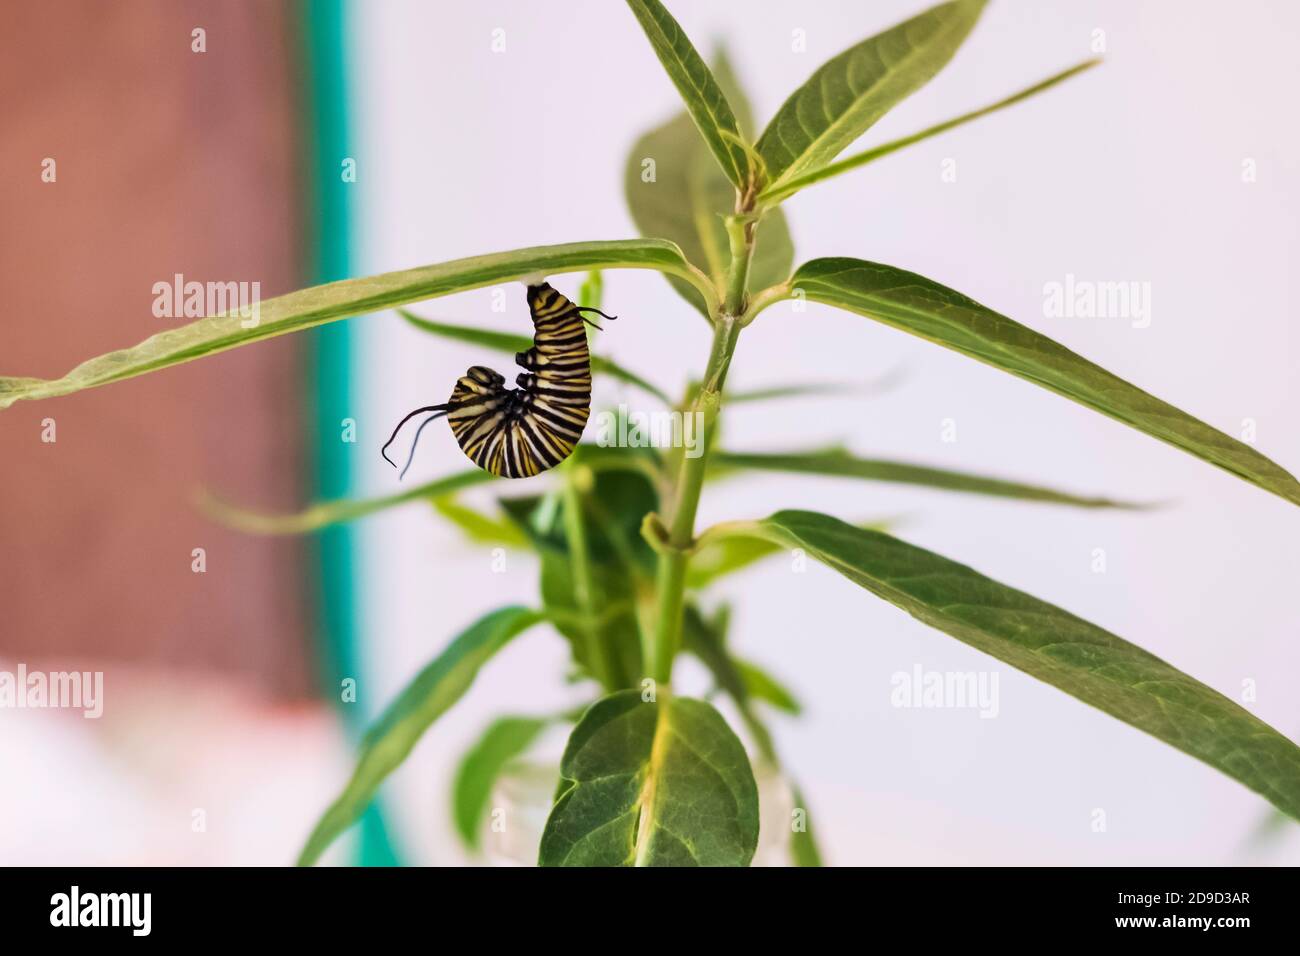 A Monarch caterpillar beginning to pupate forms a J hook shape on a milkweed leaf shortly before forming a chrysalis. Kansas, USA. Stock Photo